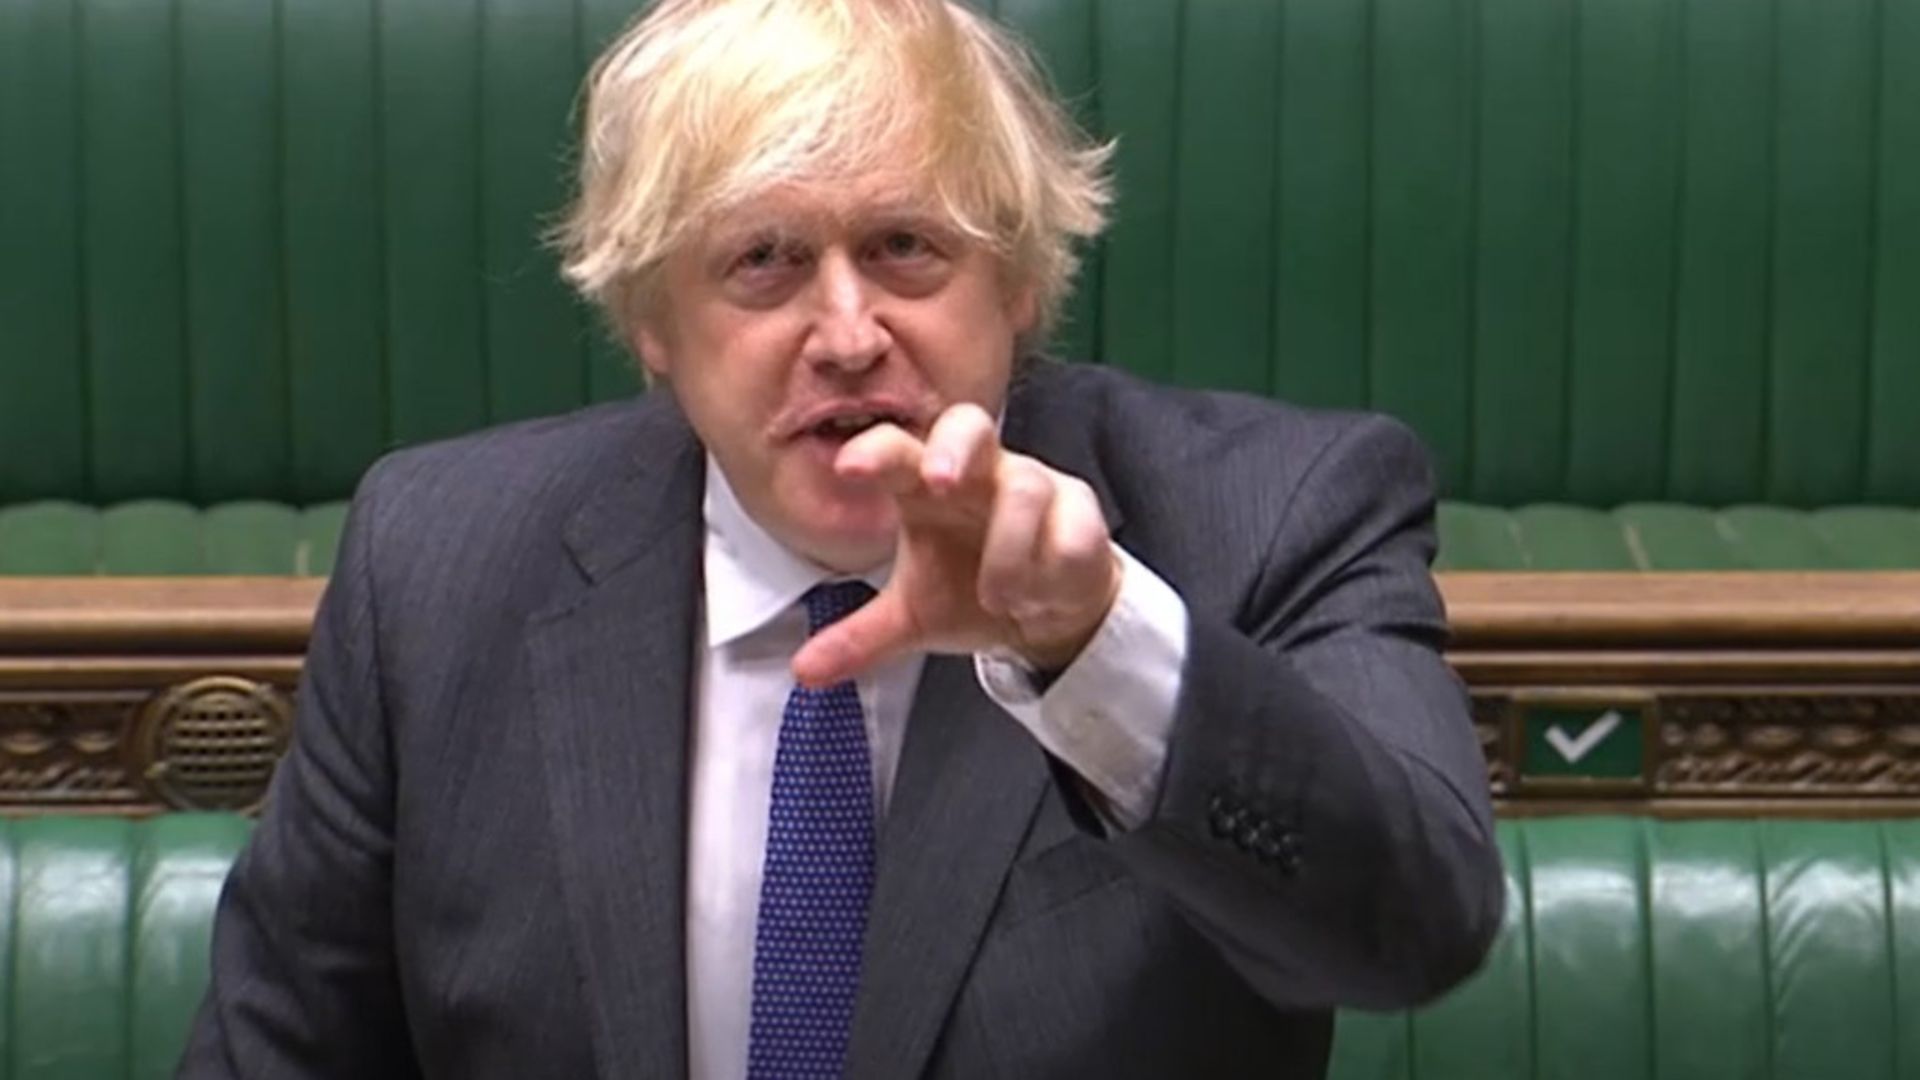 Prime Minister Boris Johnson speaks during Prime Minister's Questions in the House of Commons - Credit: PA